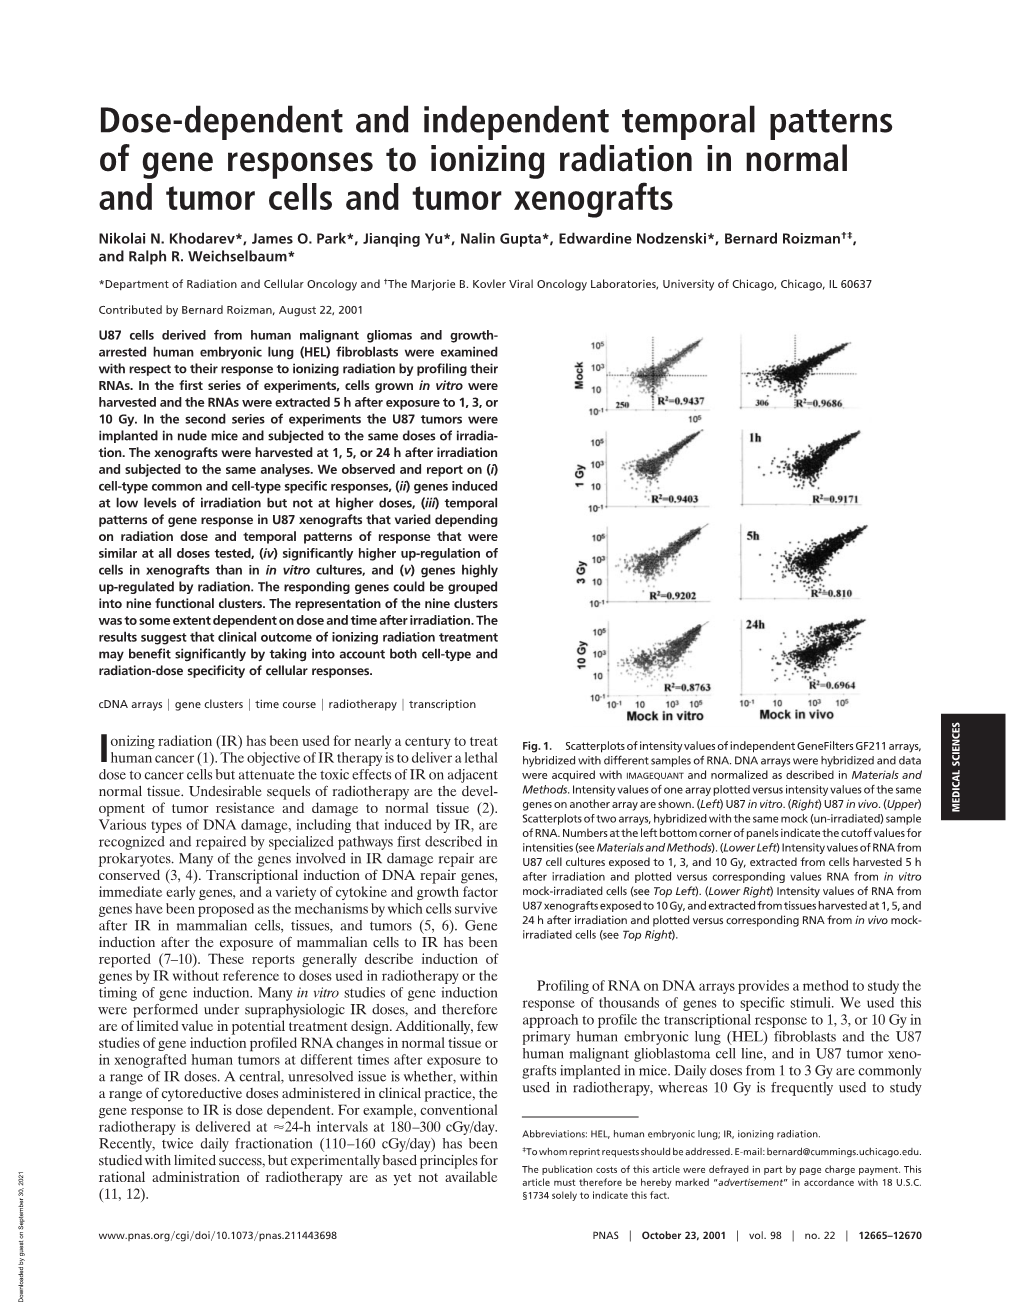 Dose-Dependent and Independent Temporal Patterns of Gene Responses to Ionizing Radiation in Normal and Tumor Cells and Tumor Xenografts